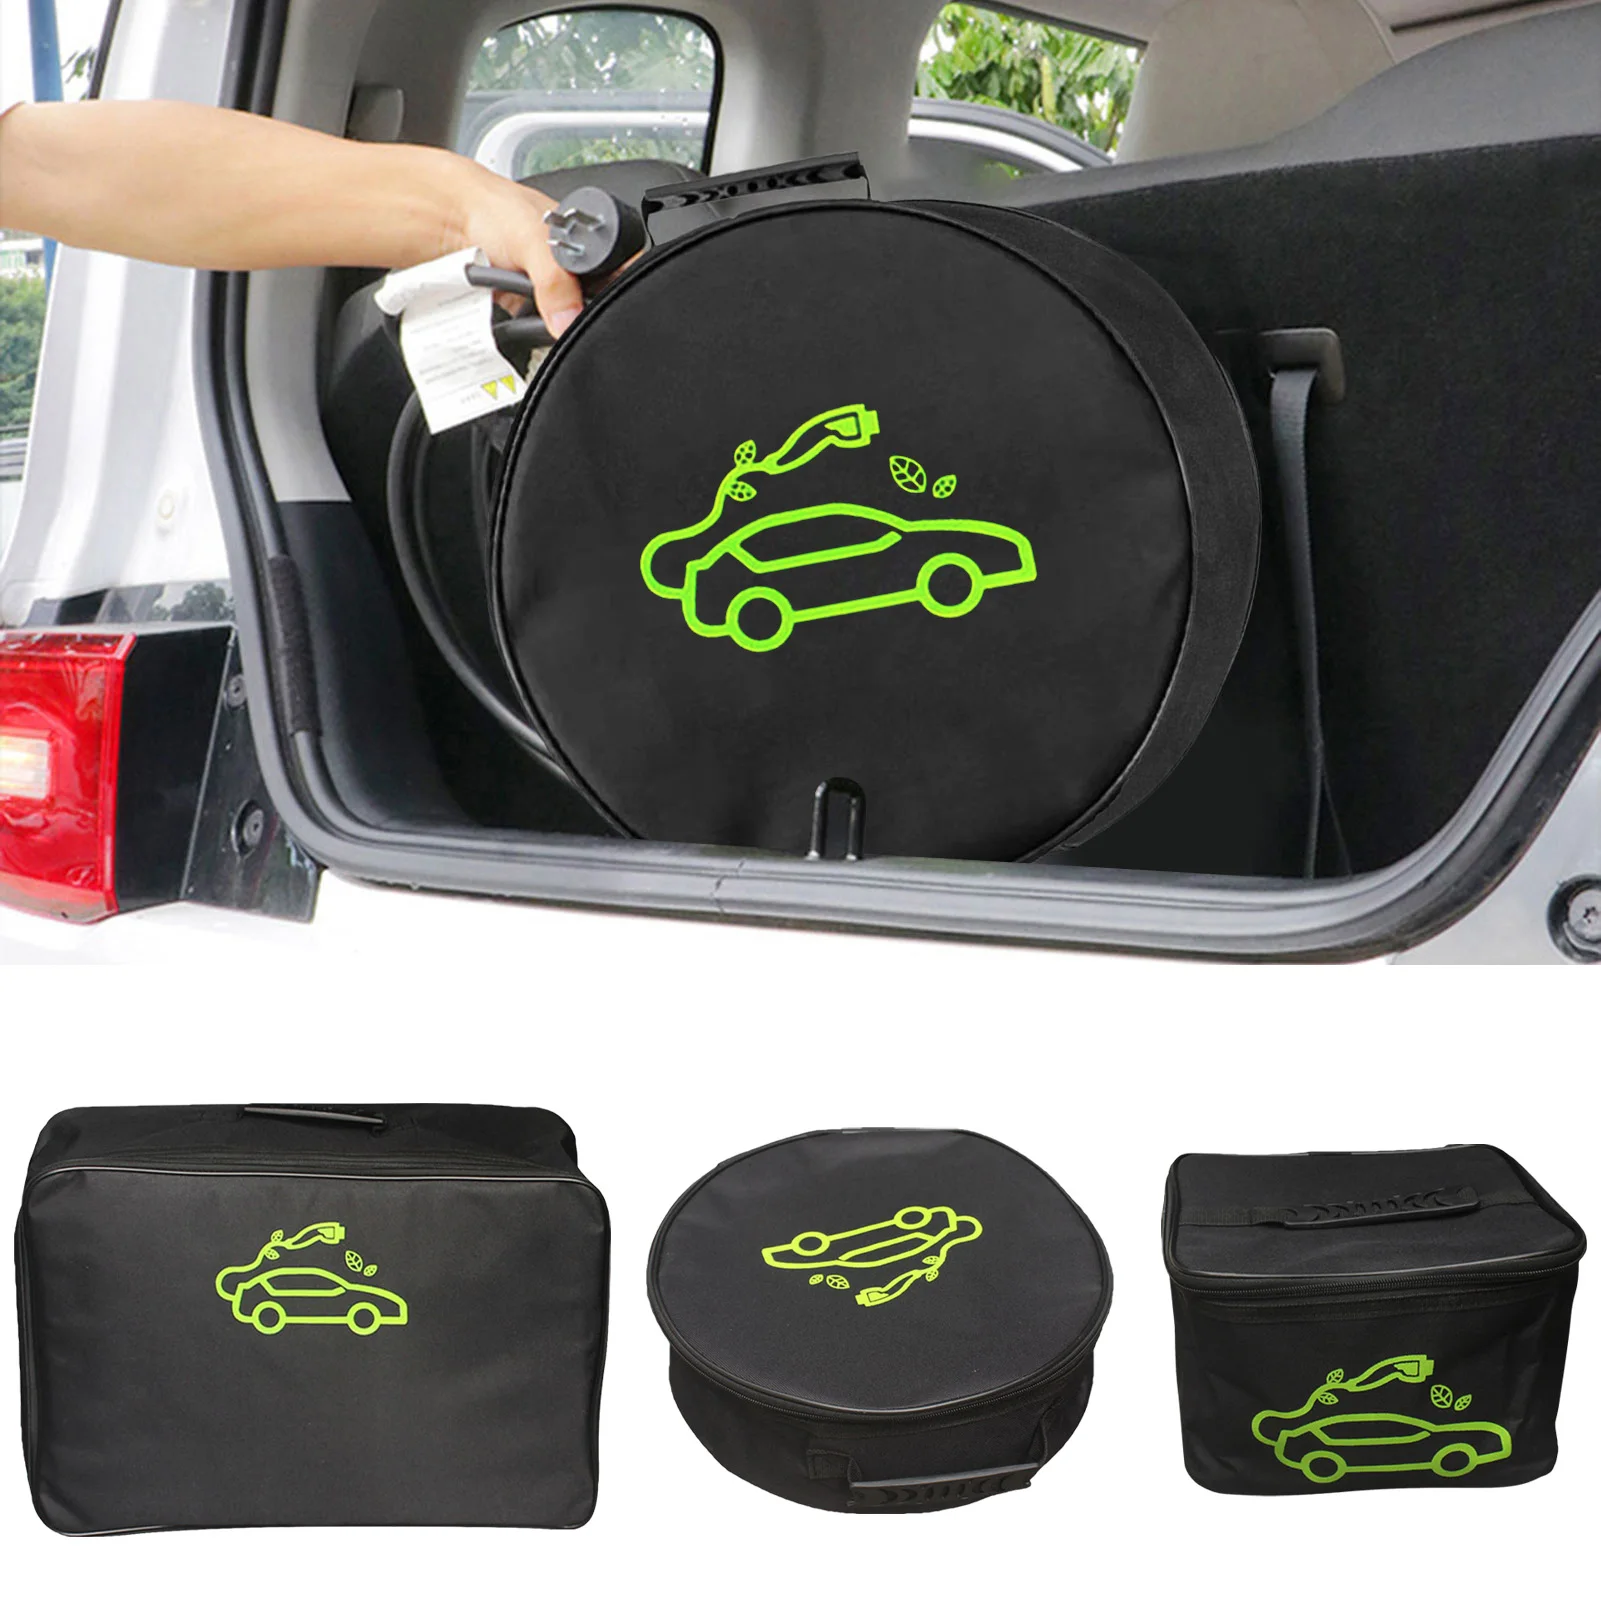 

Car Charging Cable Storage Bag Jumper Fire Retardant Carry Bag For EV Charger Plugs Sockets Charging Equipment Container